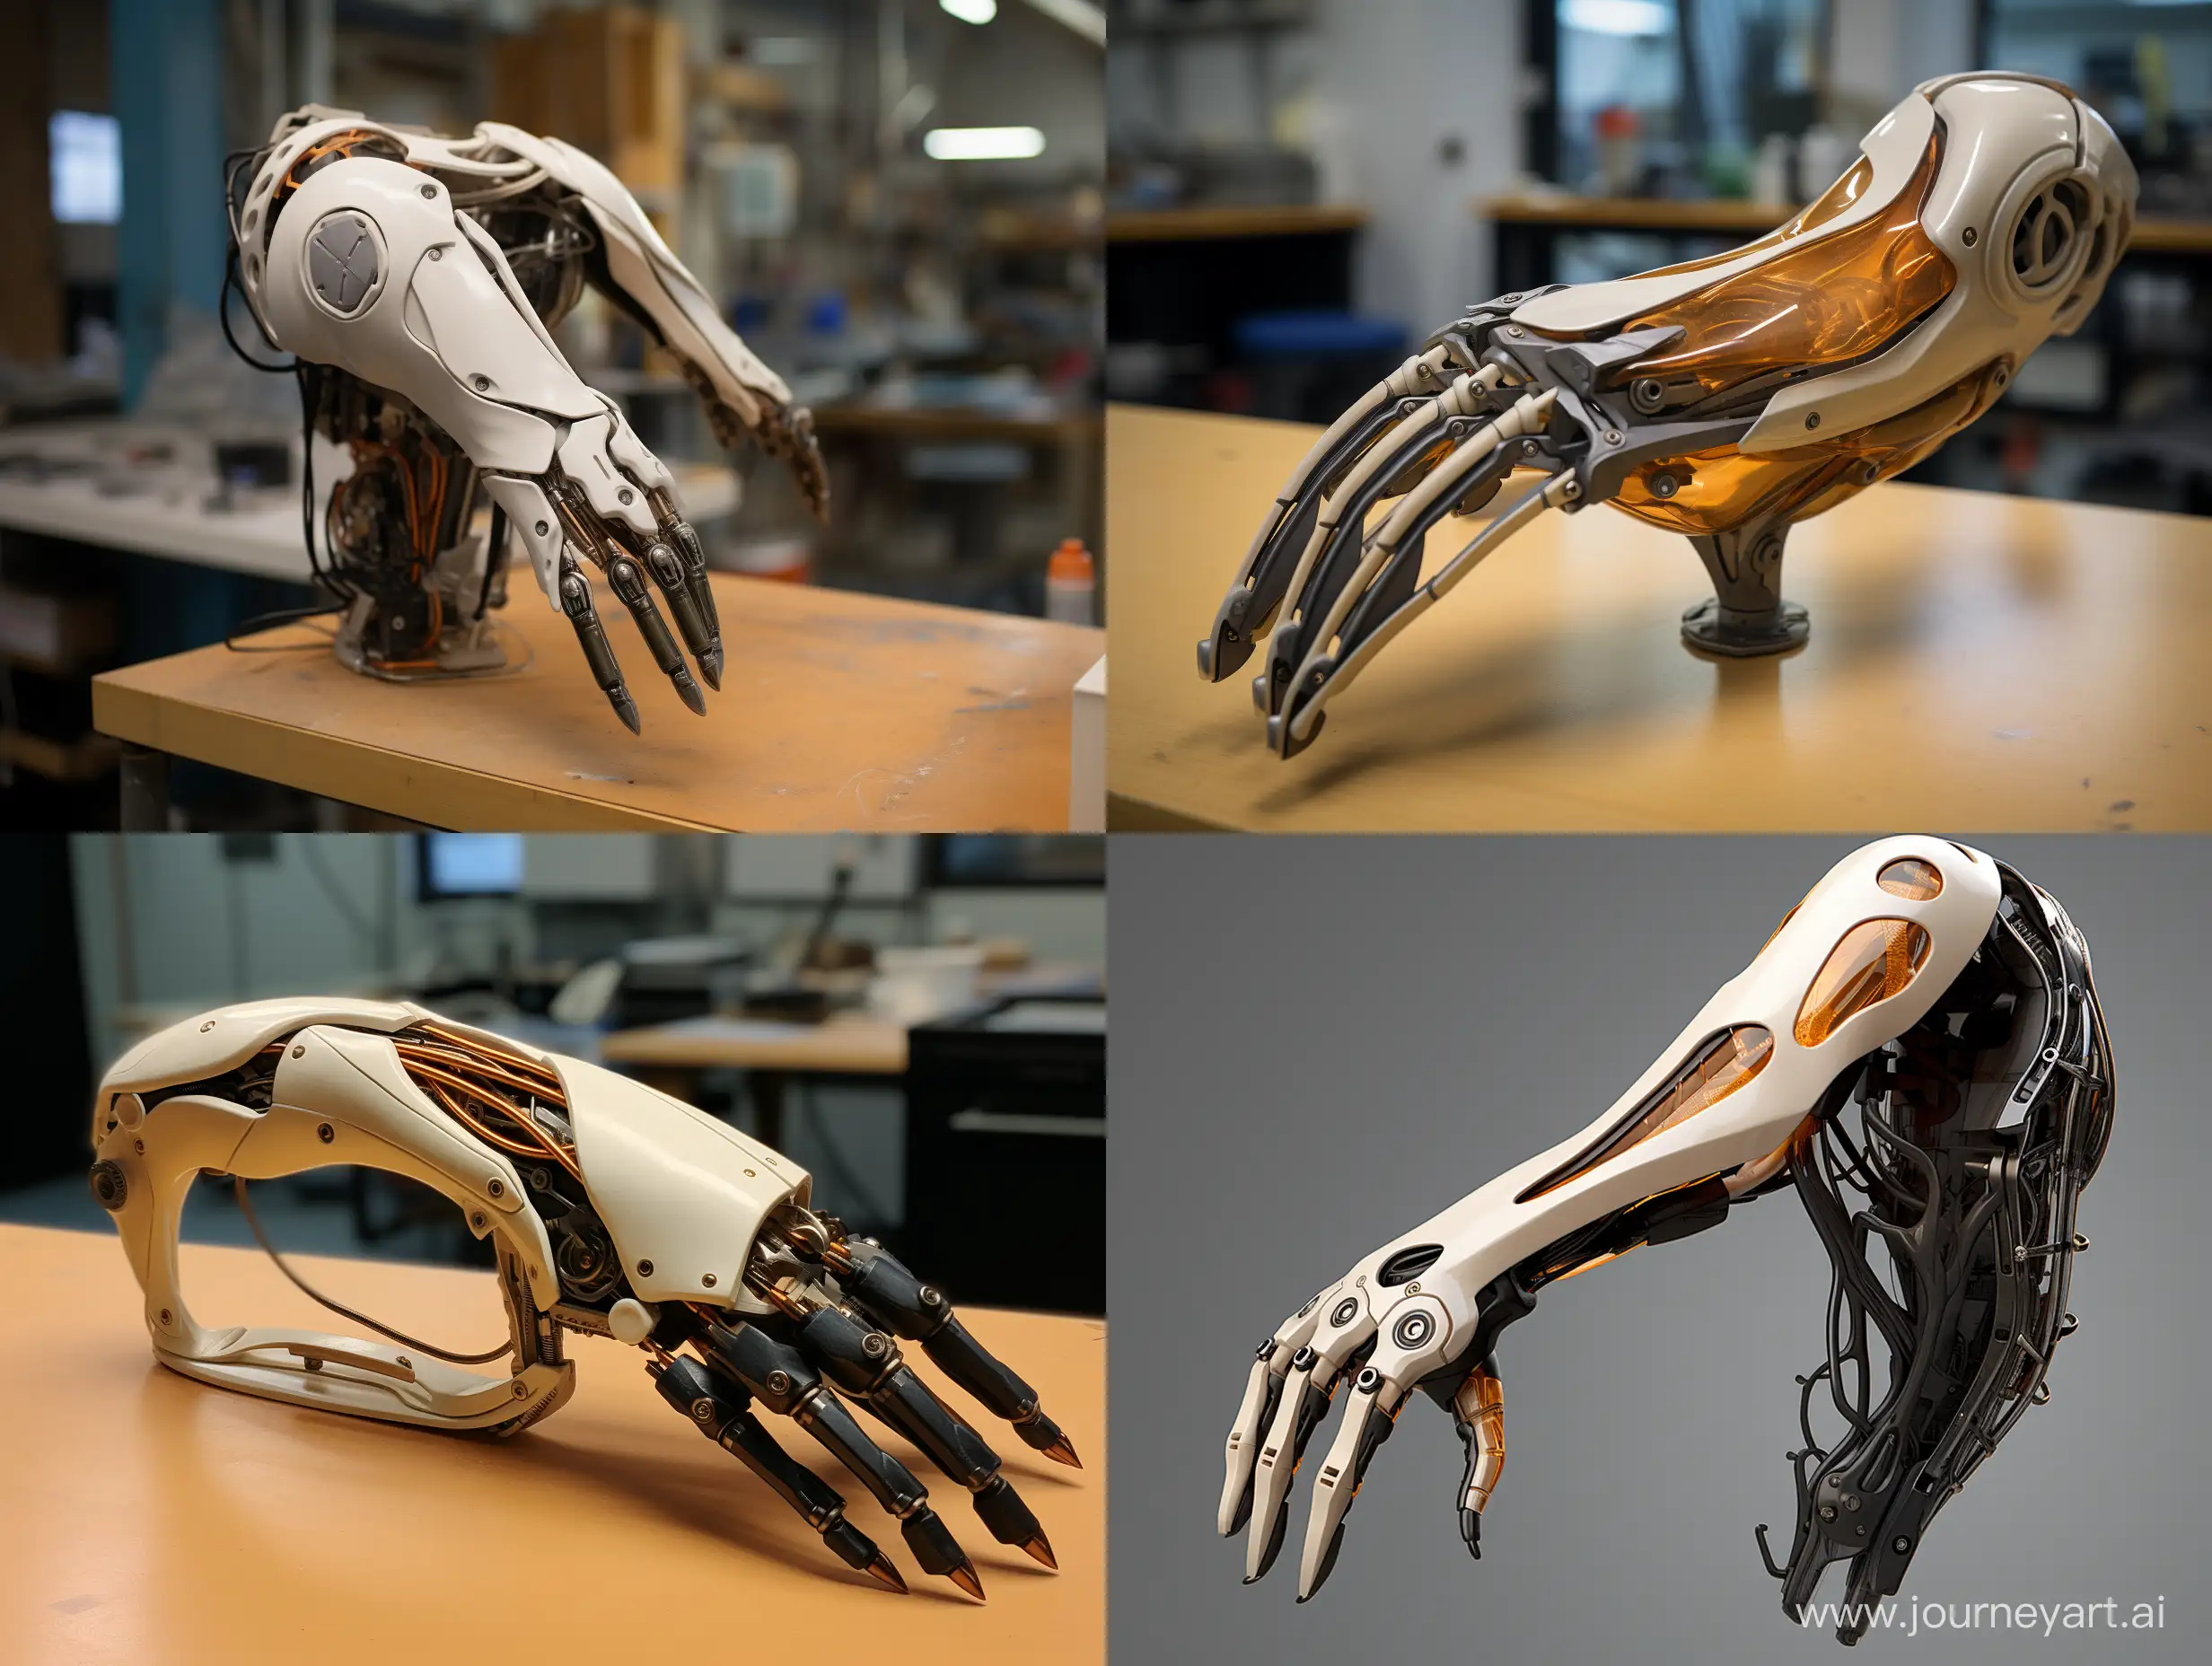 Sleek-Alita-Prosthetic-Robot-Arm-with-Articulated-Joints-for-Fluid-Movement